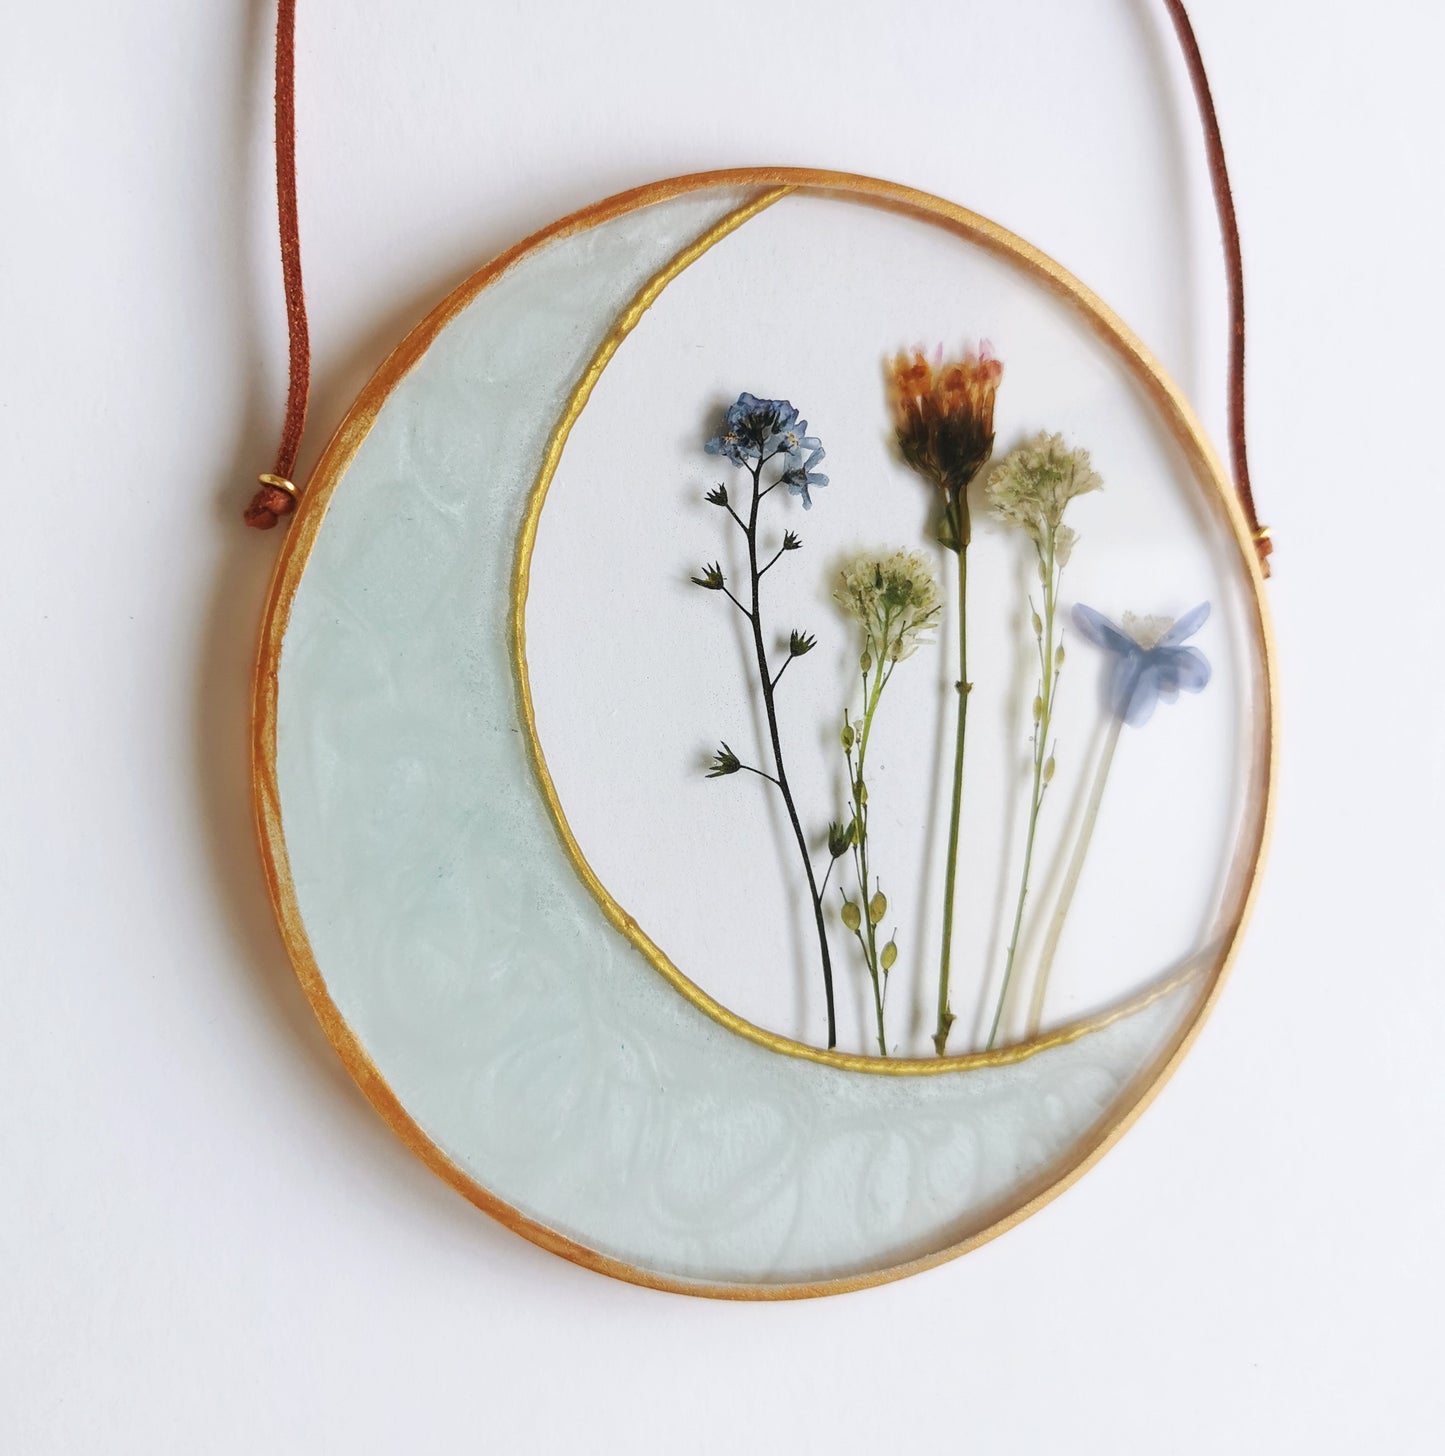 Floral moon art with real pressed flowers